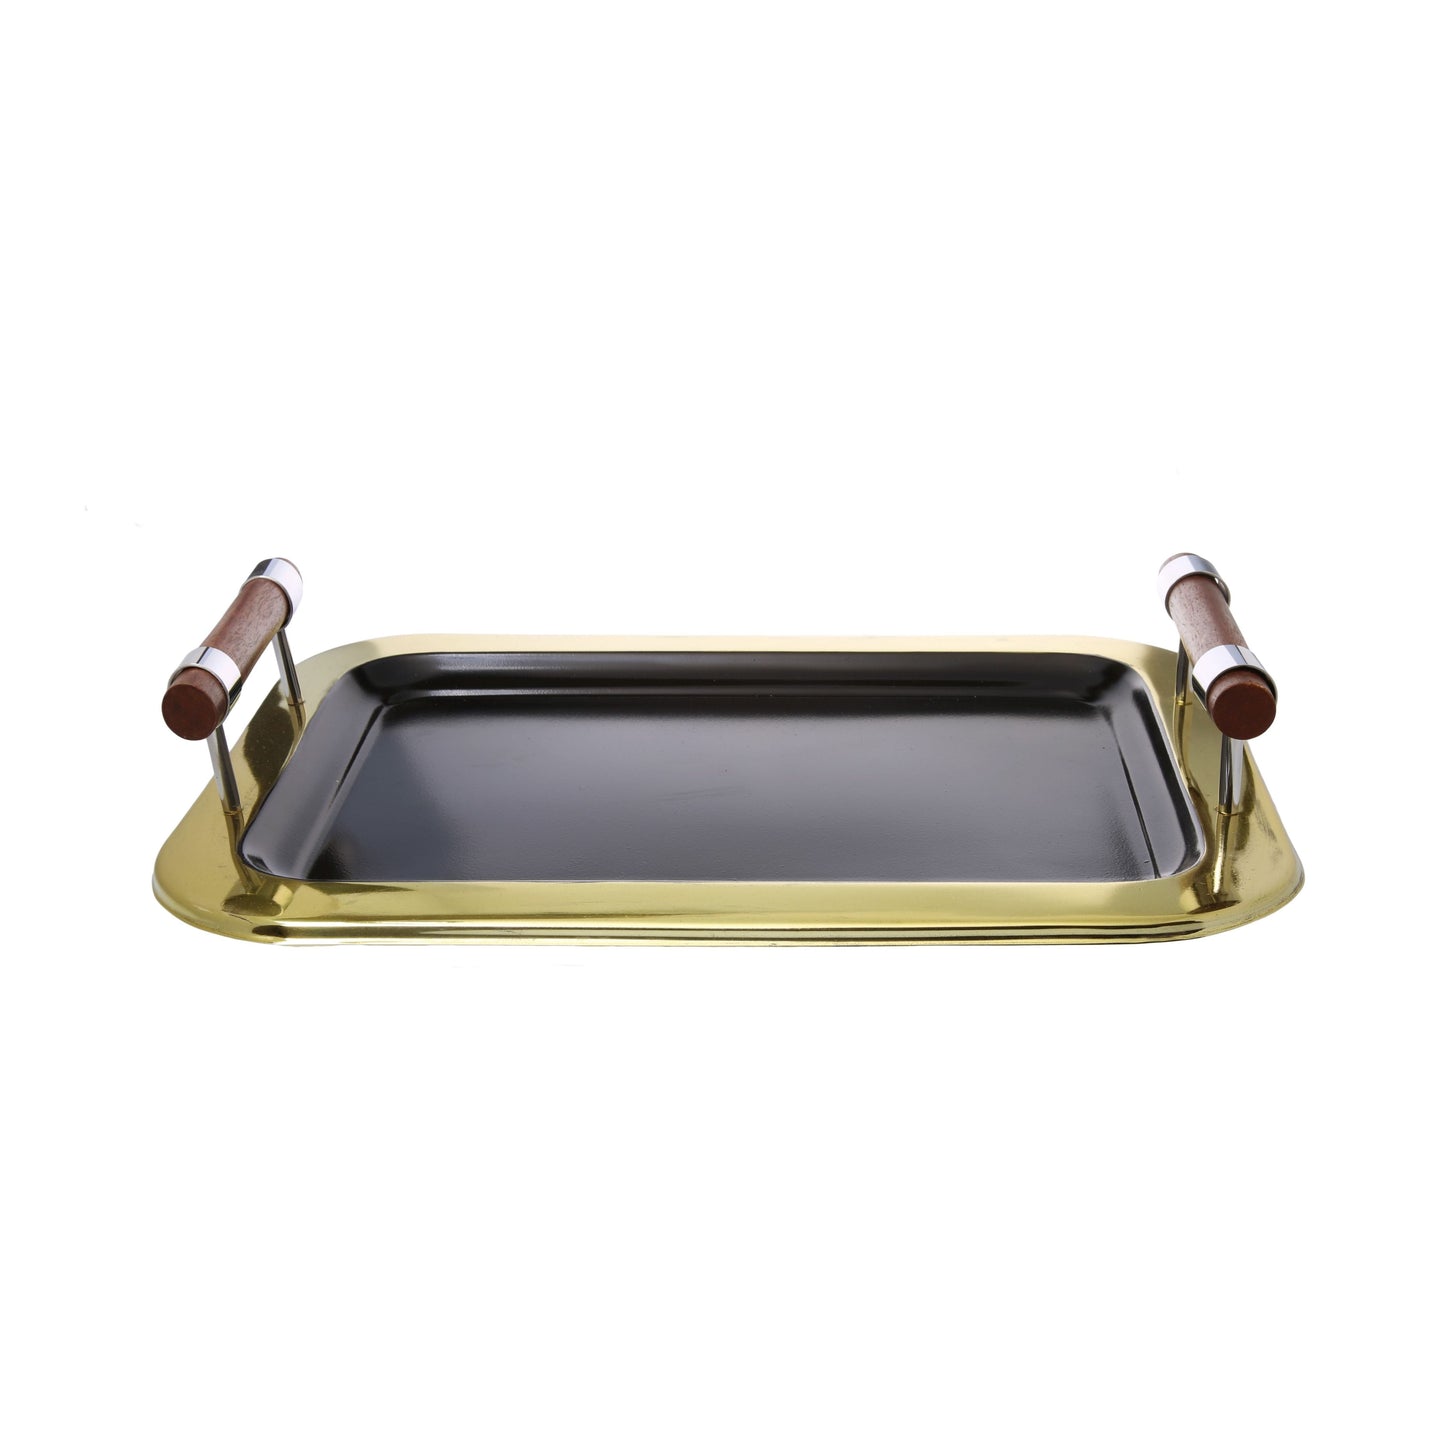 Classic Touch Decor Rectangular Tray Black With Gold Border, 16.5"